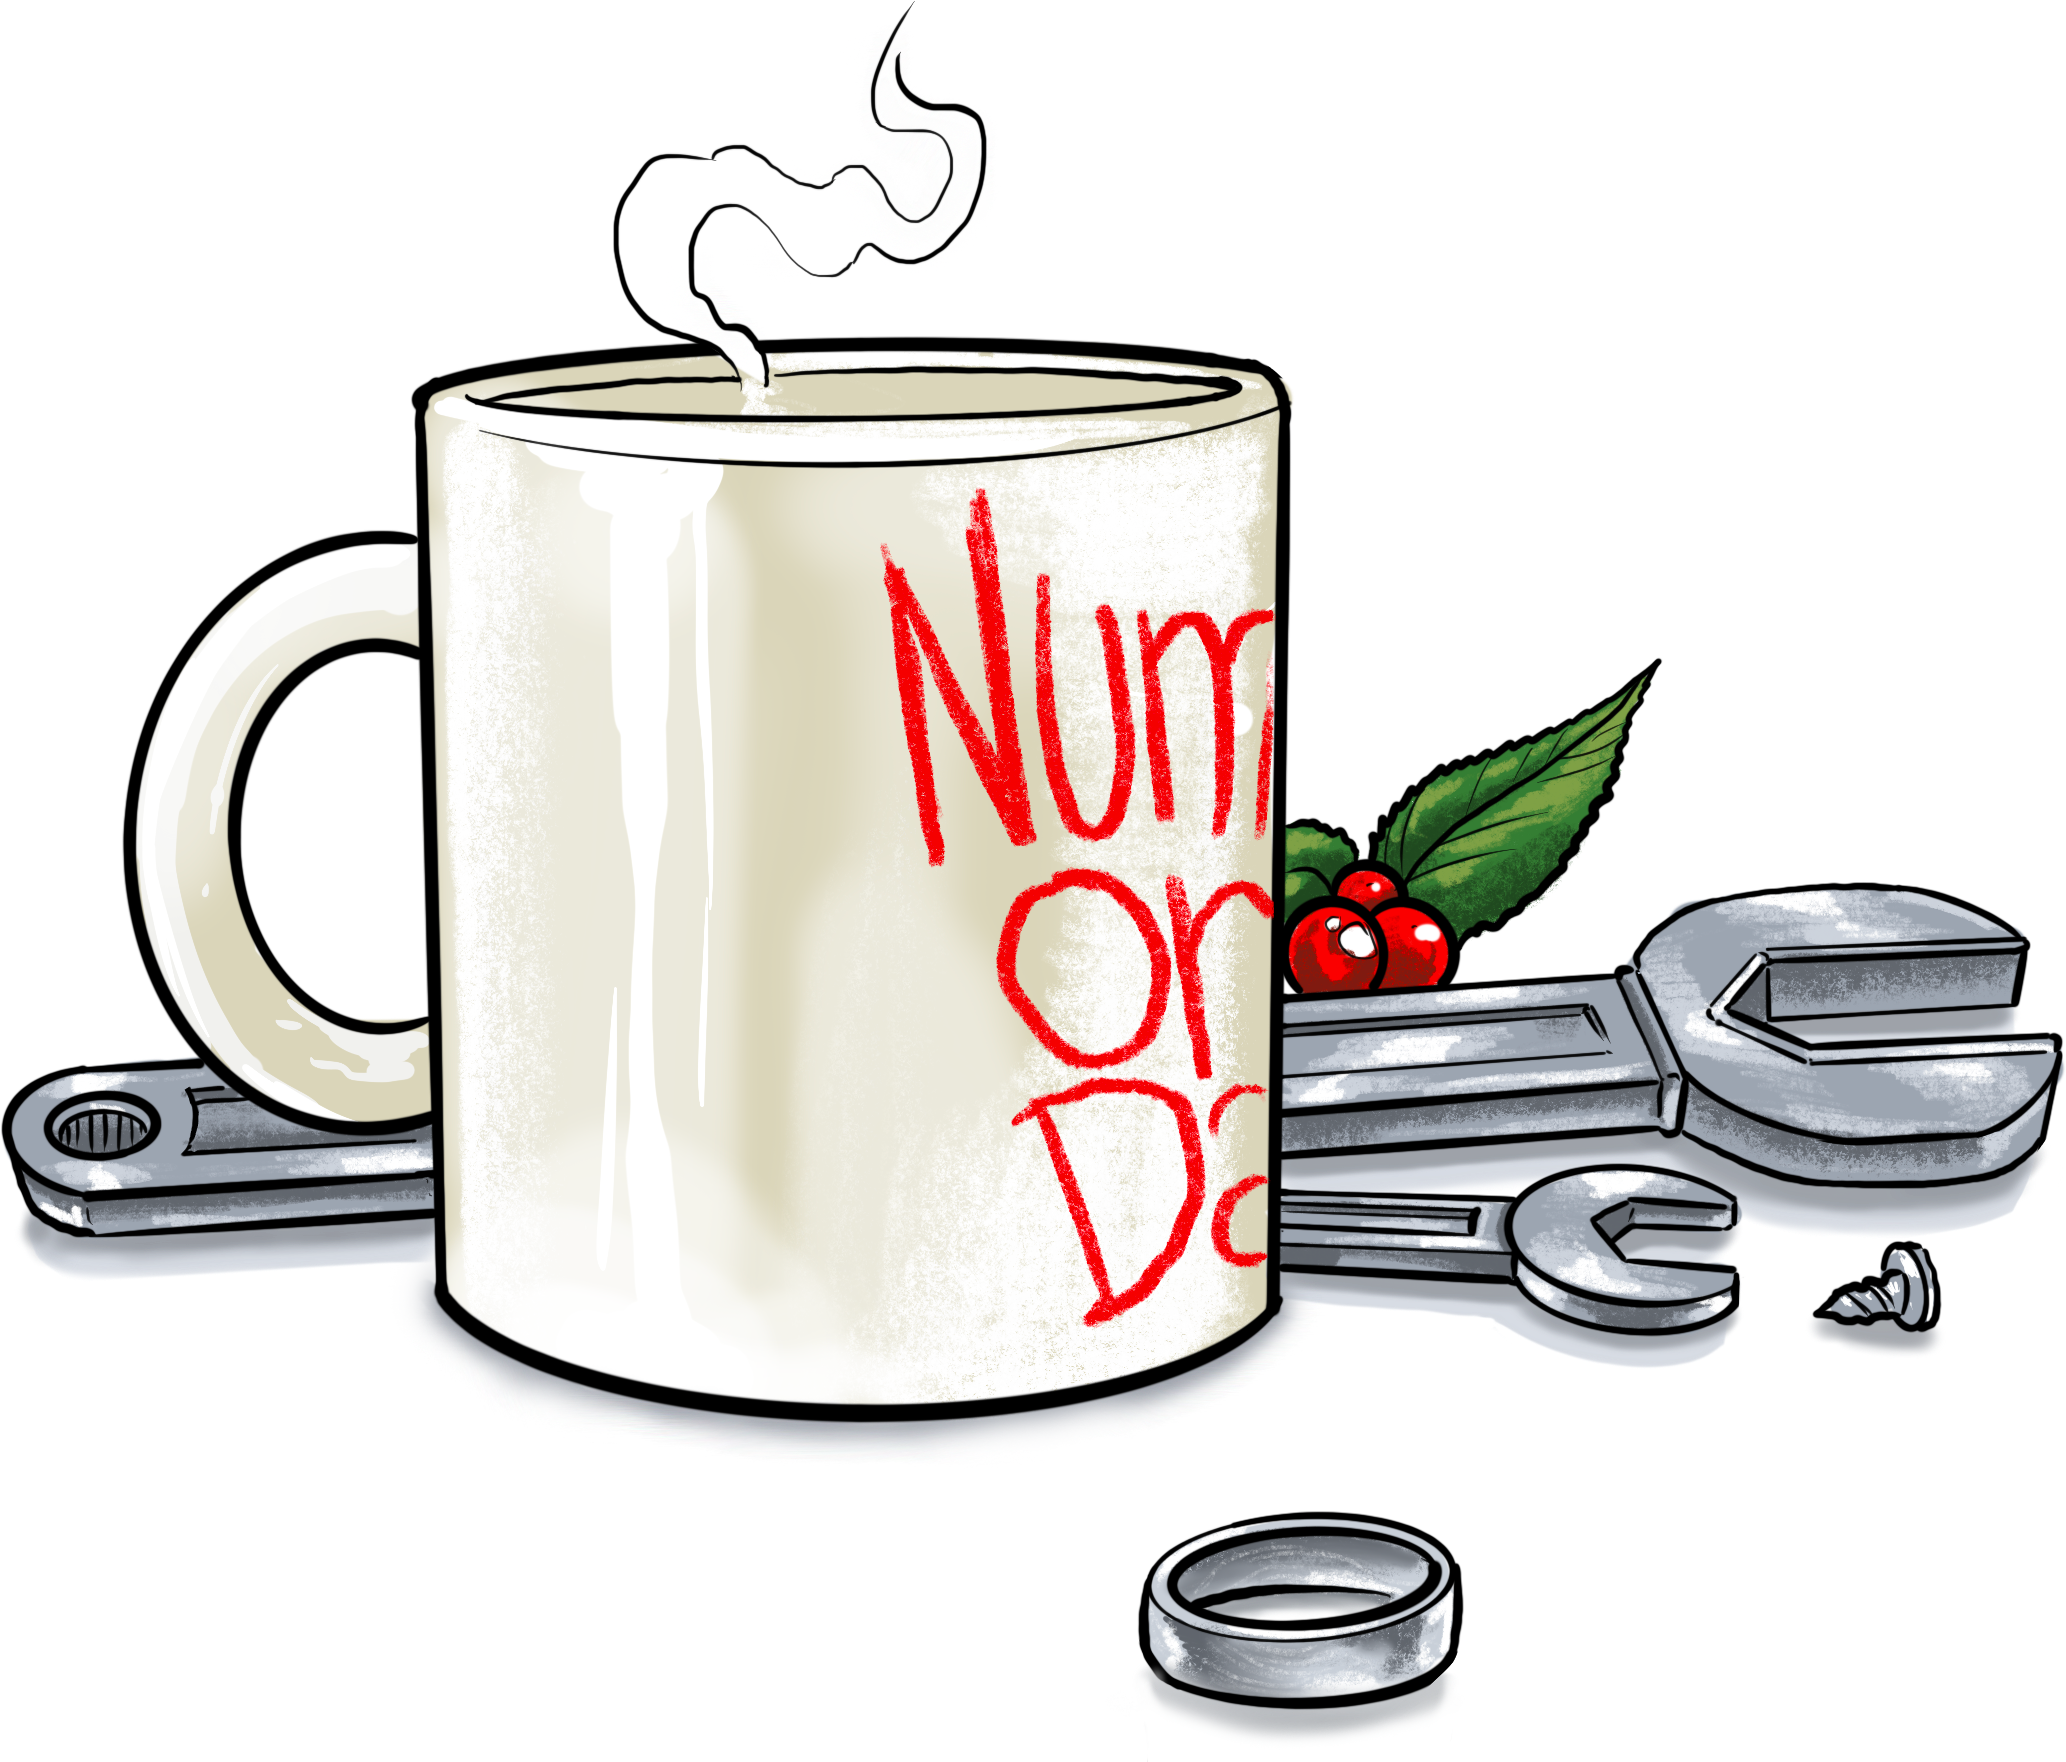 Coffee mug with wrenches, a ring, and holly berries.